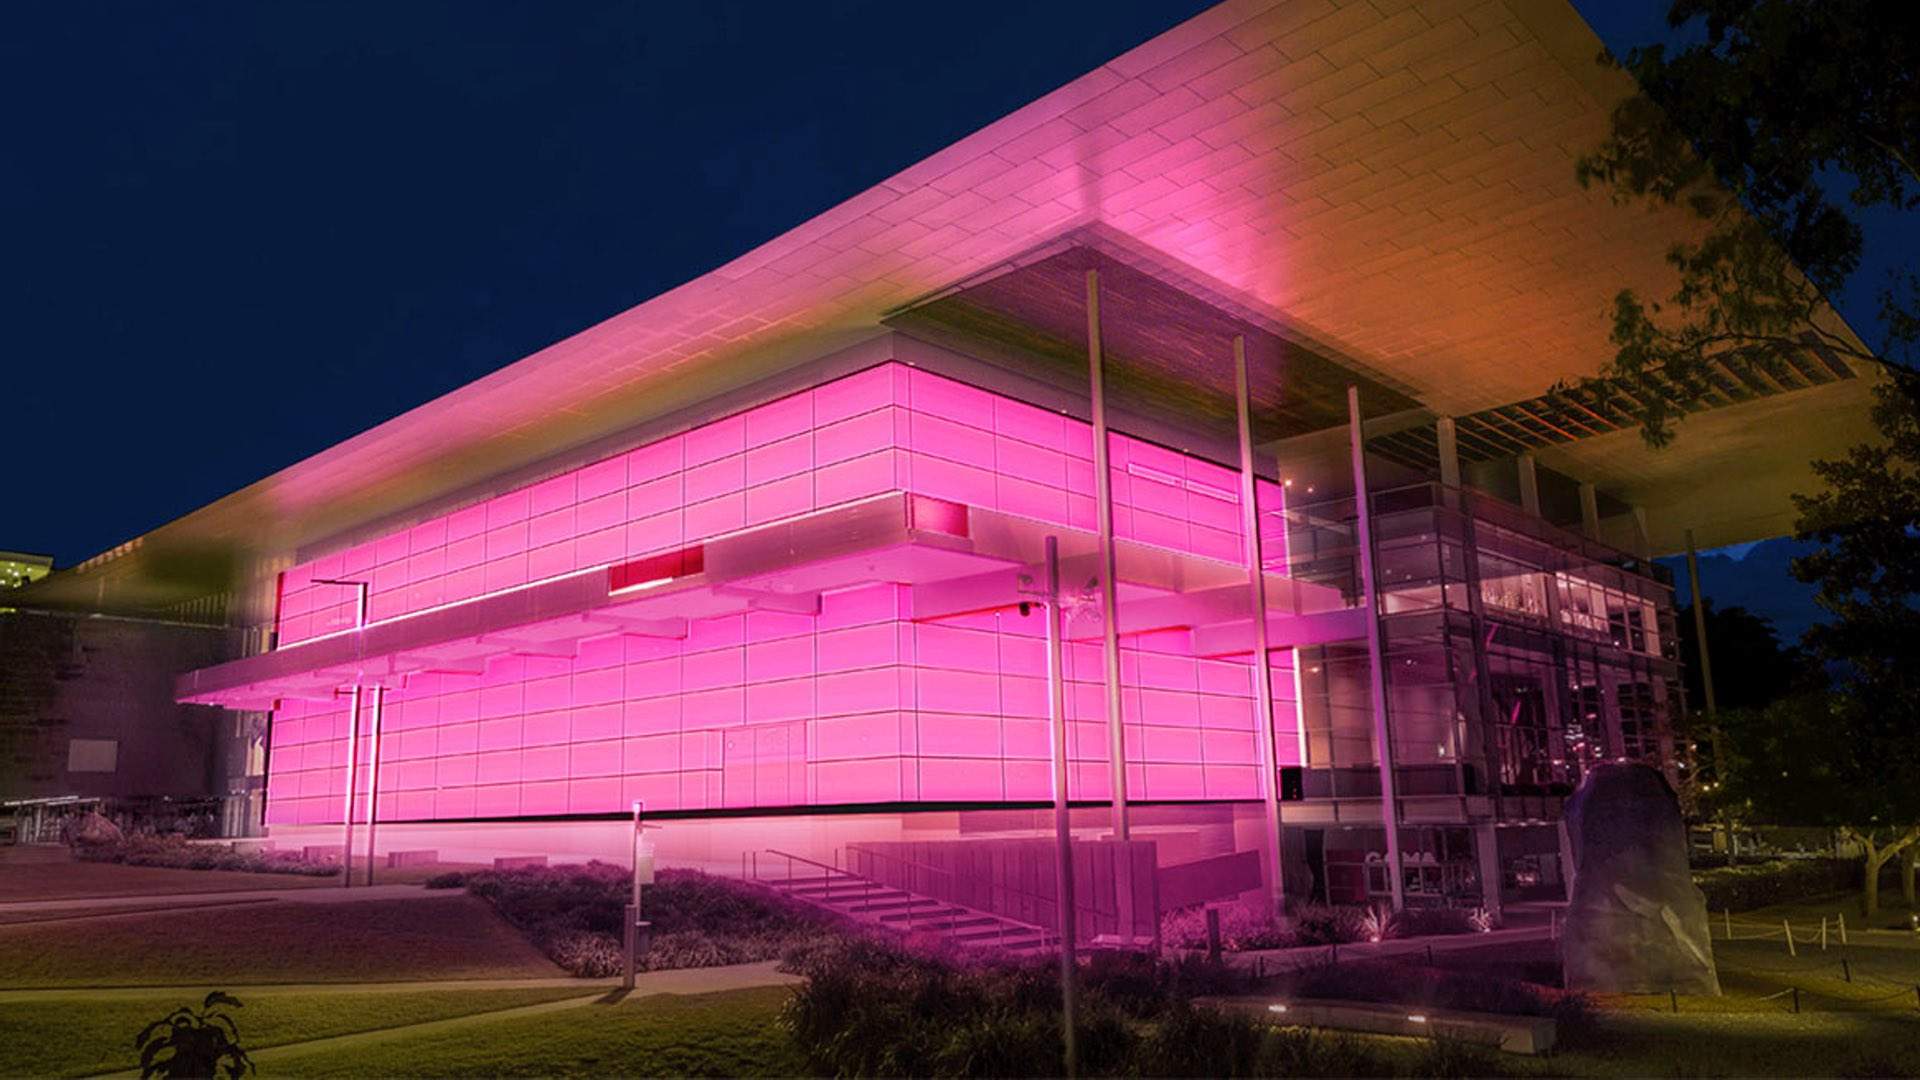 Brisbane's GOMA Is Getting a Major New James Turrell Light Installation